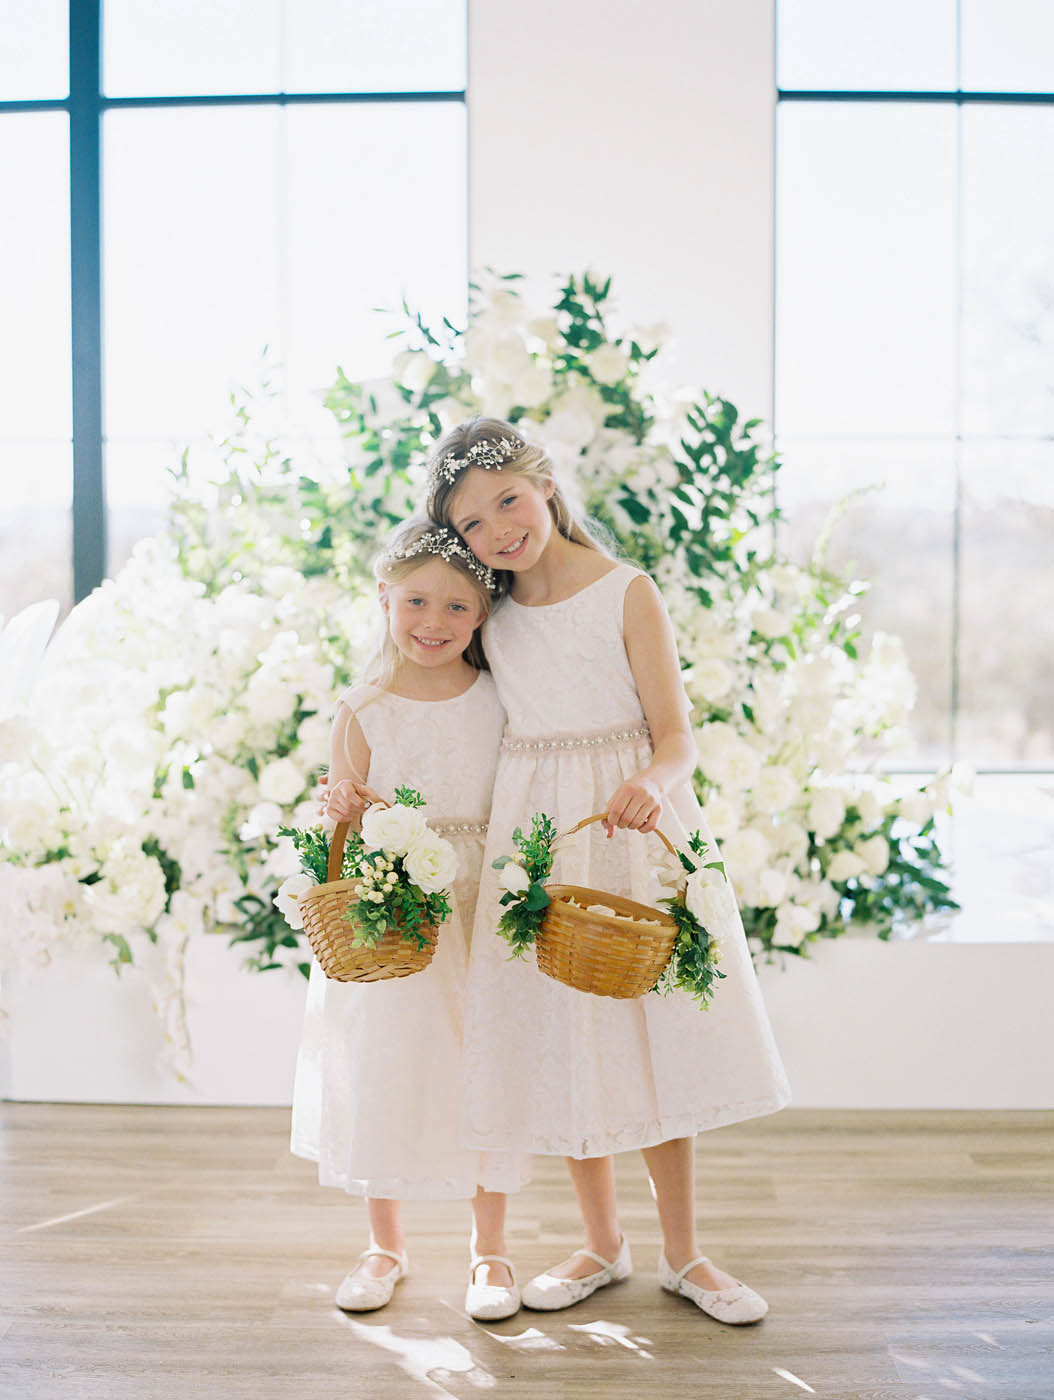 the flower girls smile together and hold their baskets in front of the piano decked out in white and green floral